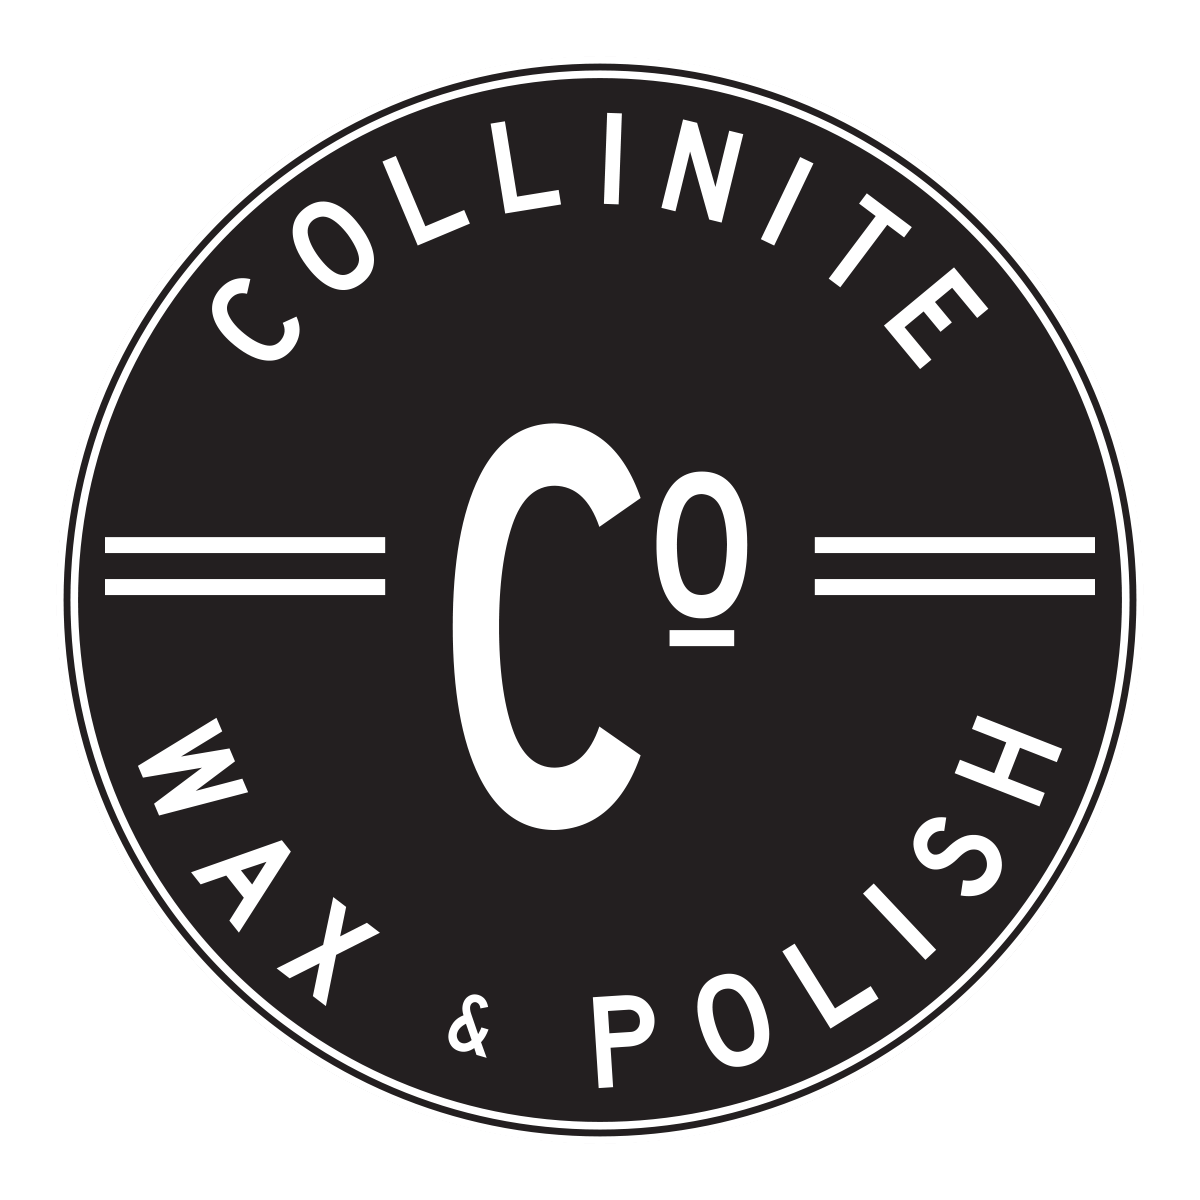 Collinite, one of oldest and longest running automotive wax brands, using the same great 845 Insulator Wax